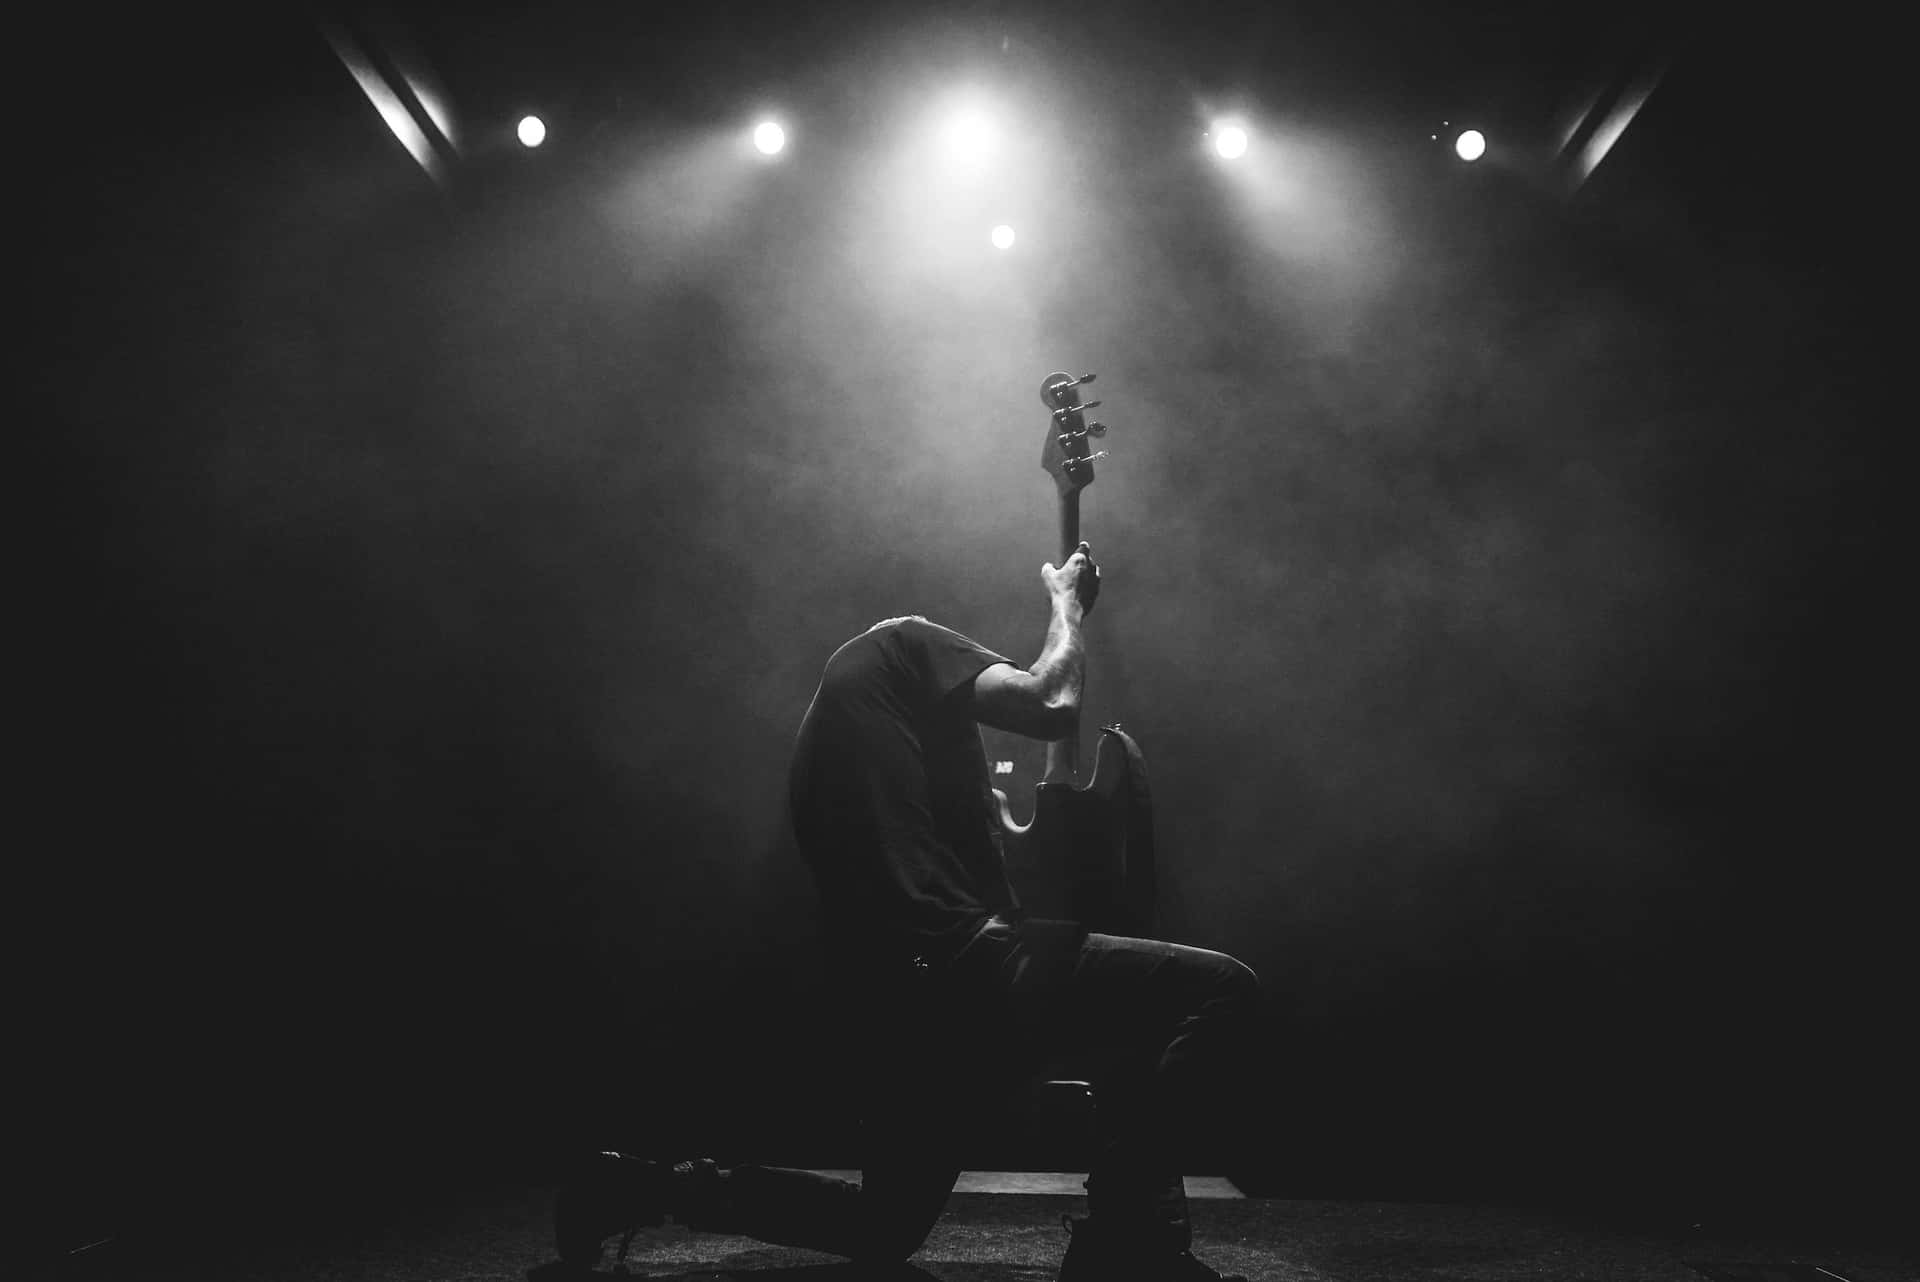 Solitary Guitarist On Stage.jpg Wallpaper